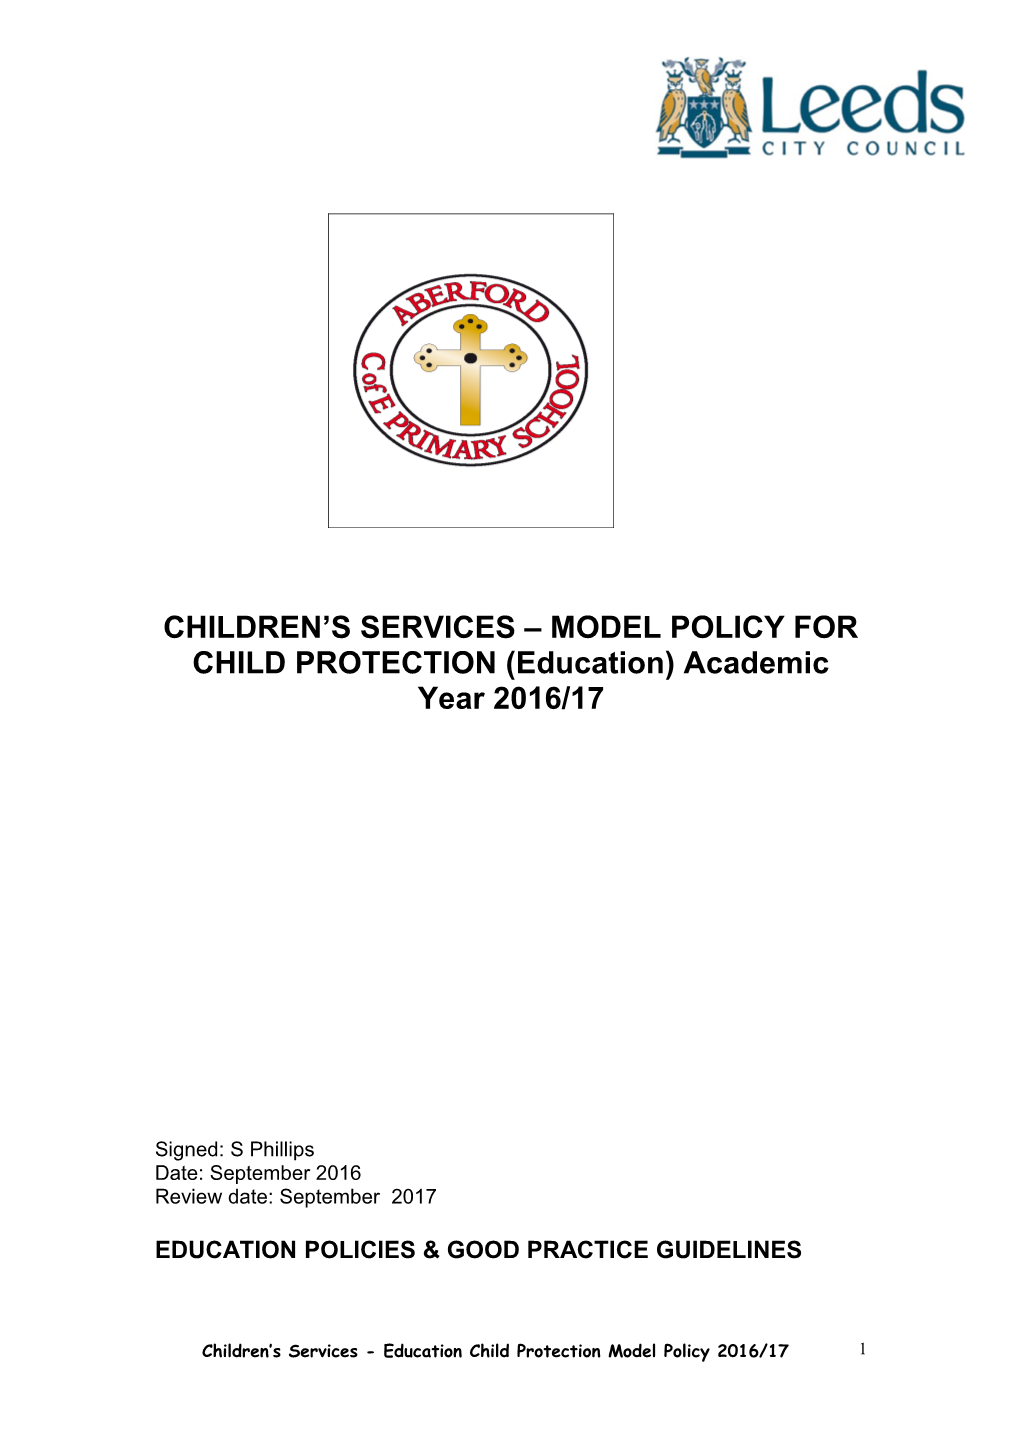 CHILDREN S SERVICES MODEL POLICY for CHILD PROTECTION (Education) Academic Year 2016/17